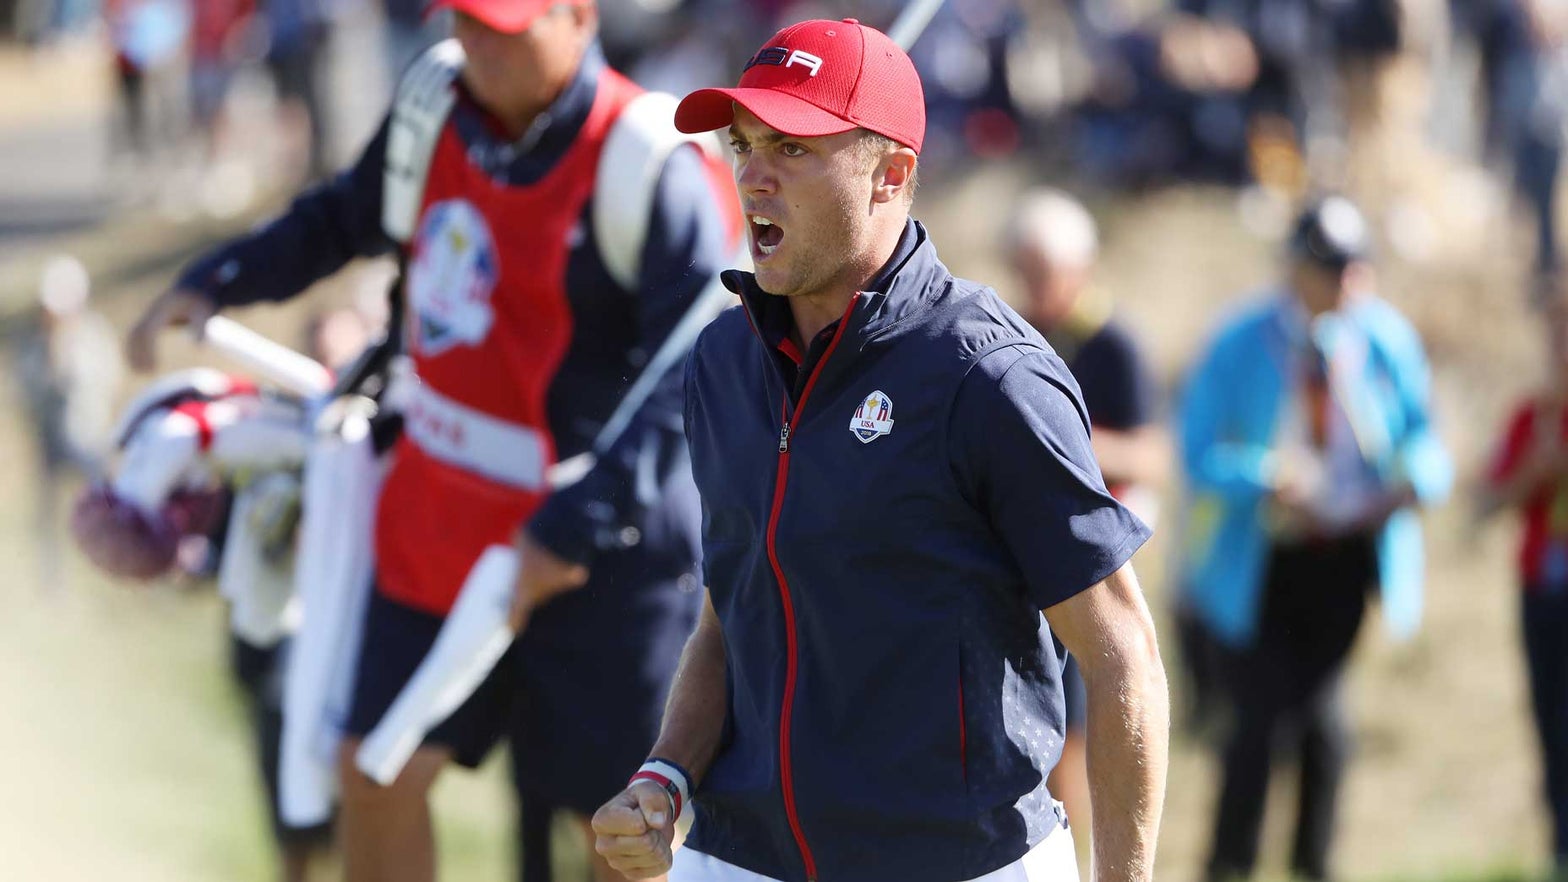 Here's how Team USA's Ryder Cup roster looks after automatic qualifying